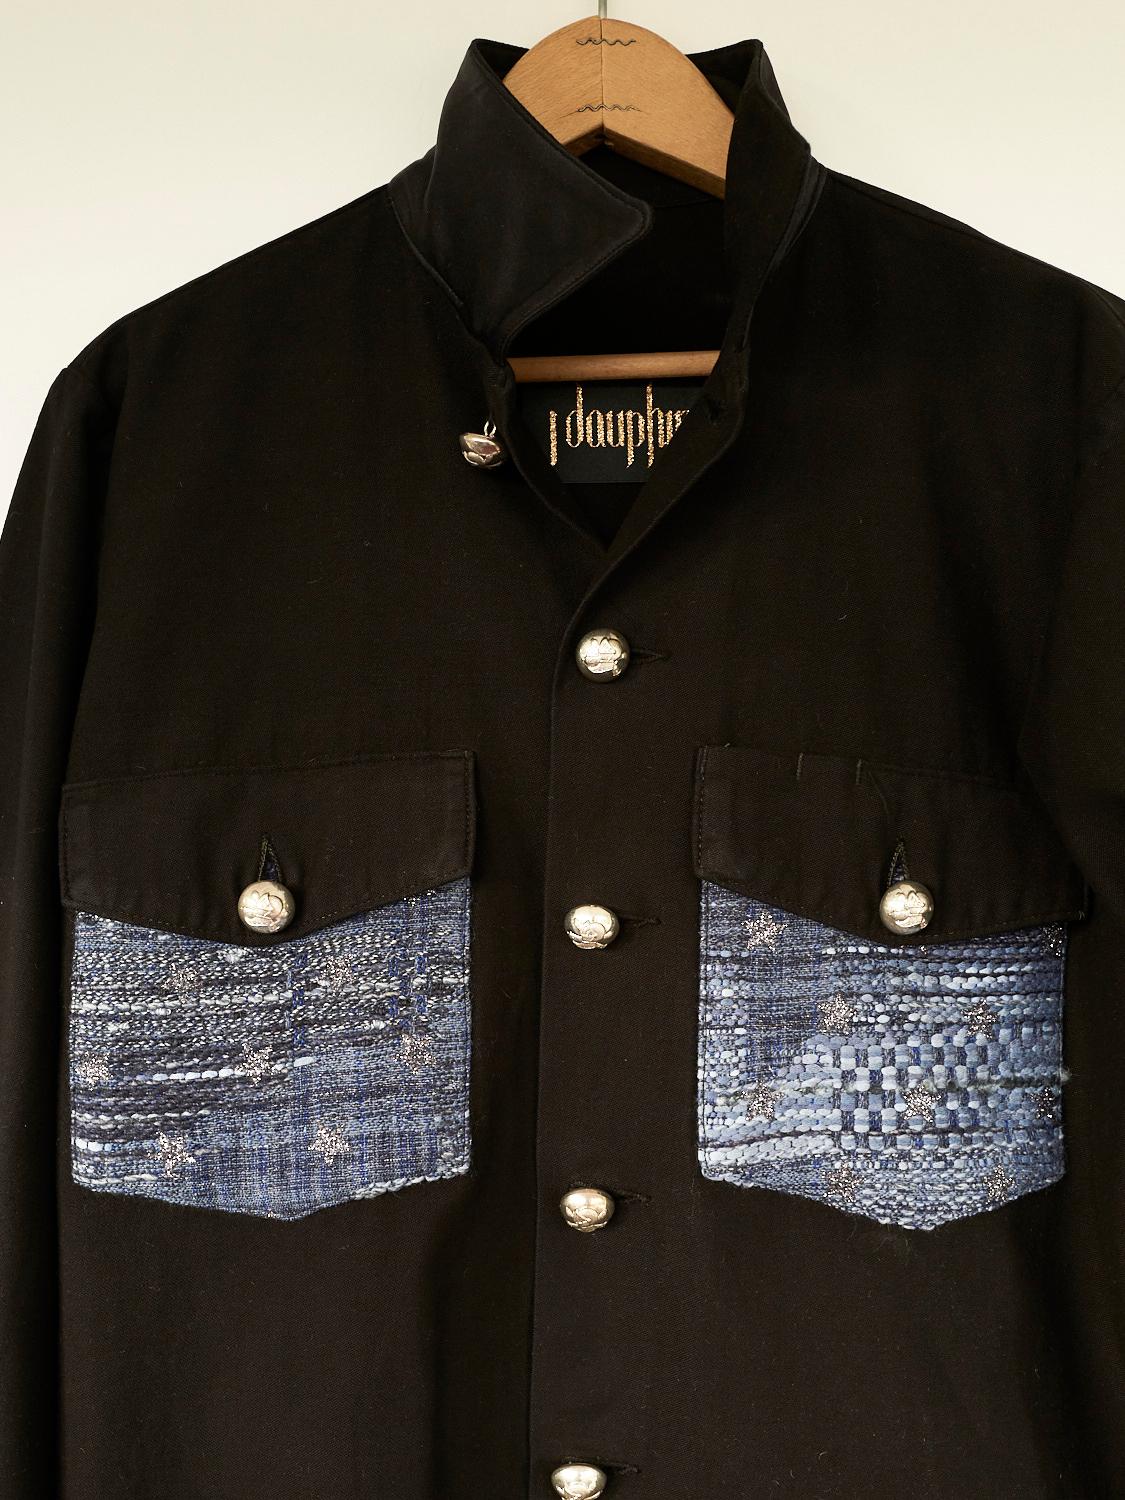 Embellished Repurposed Vintage Military US Jacket From the 70's Dyed Black with French Glitter Star Tweed Pockets and Details of Italian Black Silk, Open Elbows reinforced with Silk, Military Vintage Original Silver Tone Buttons Made in